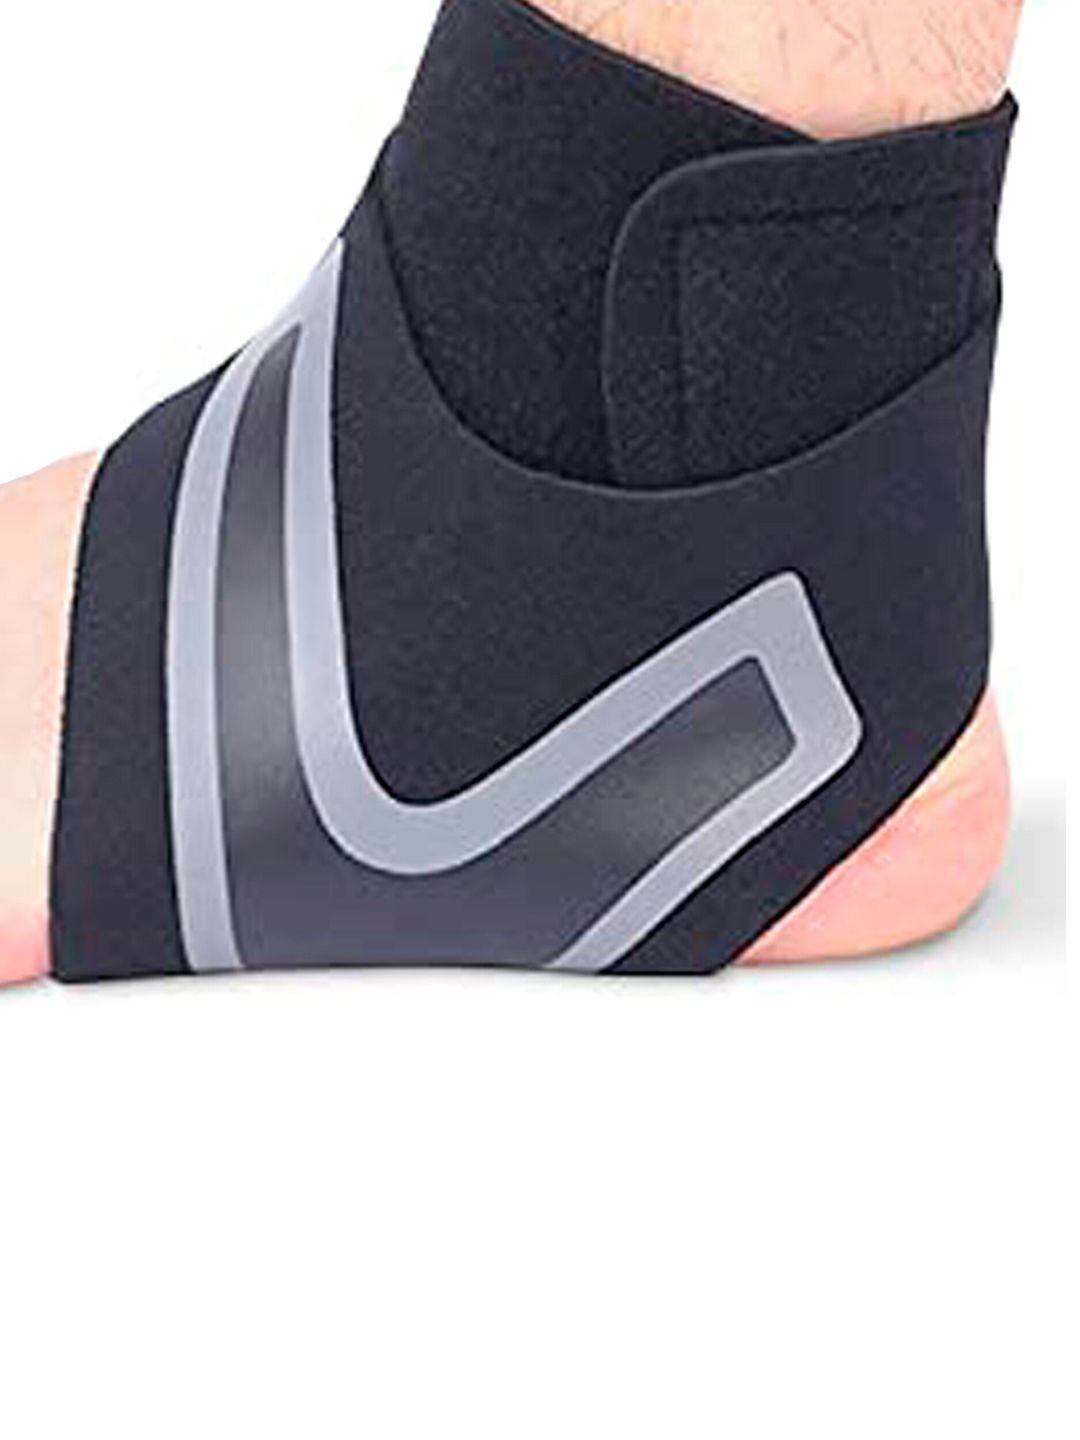 boldfit black & grey ankle support wrap for pain relief compression brace for injuries